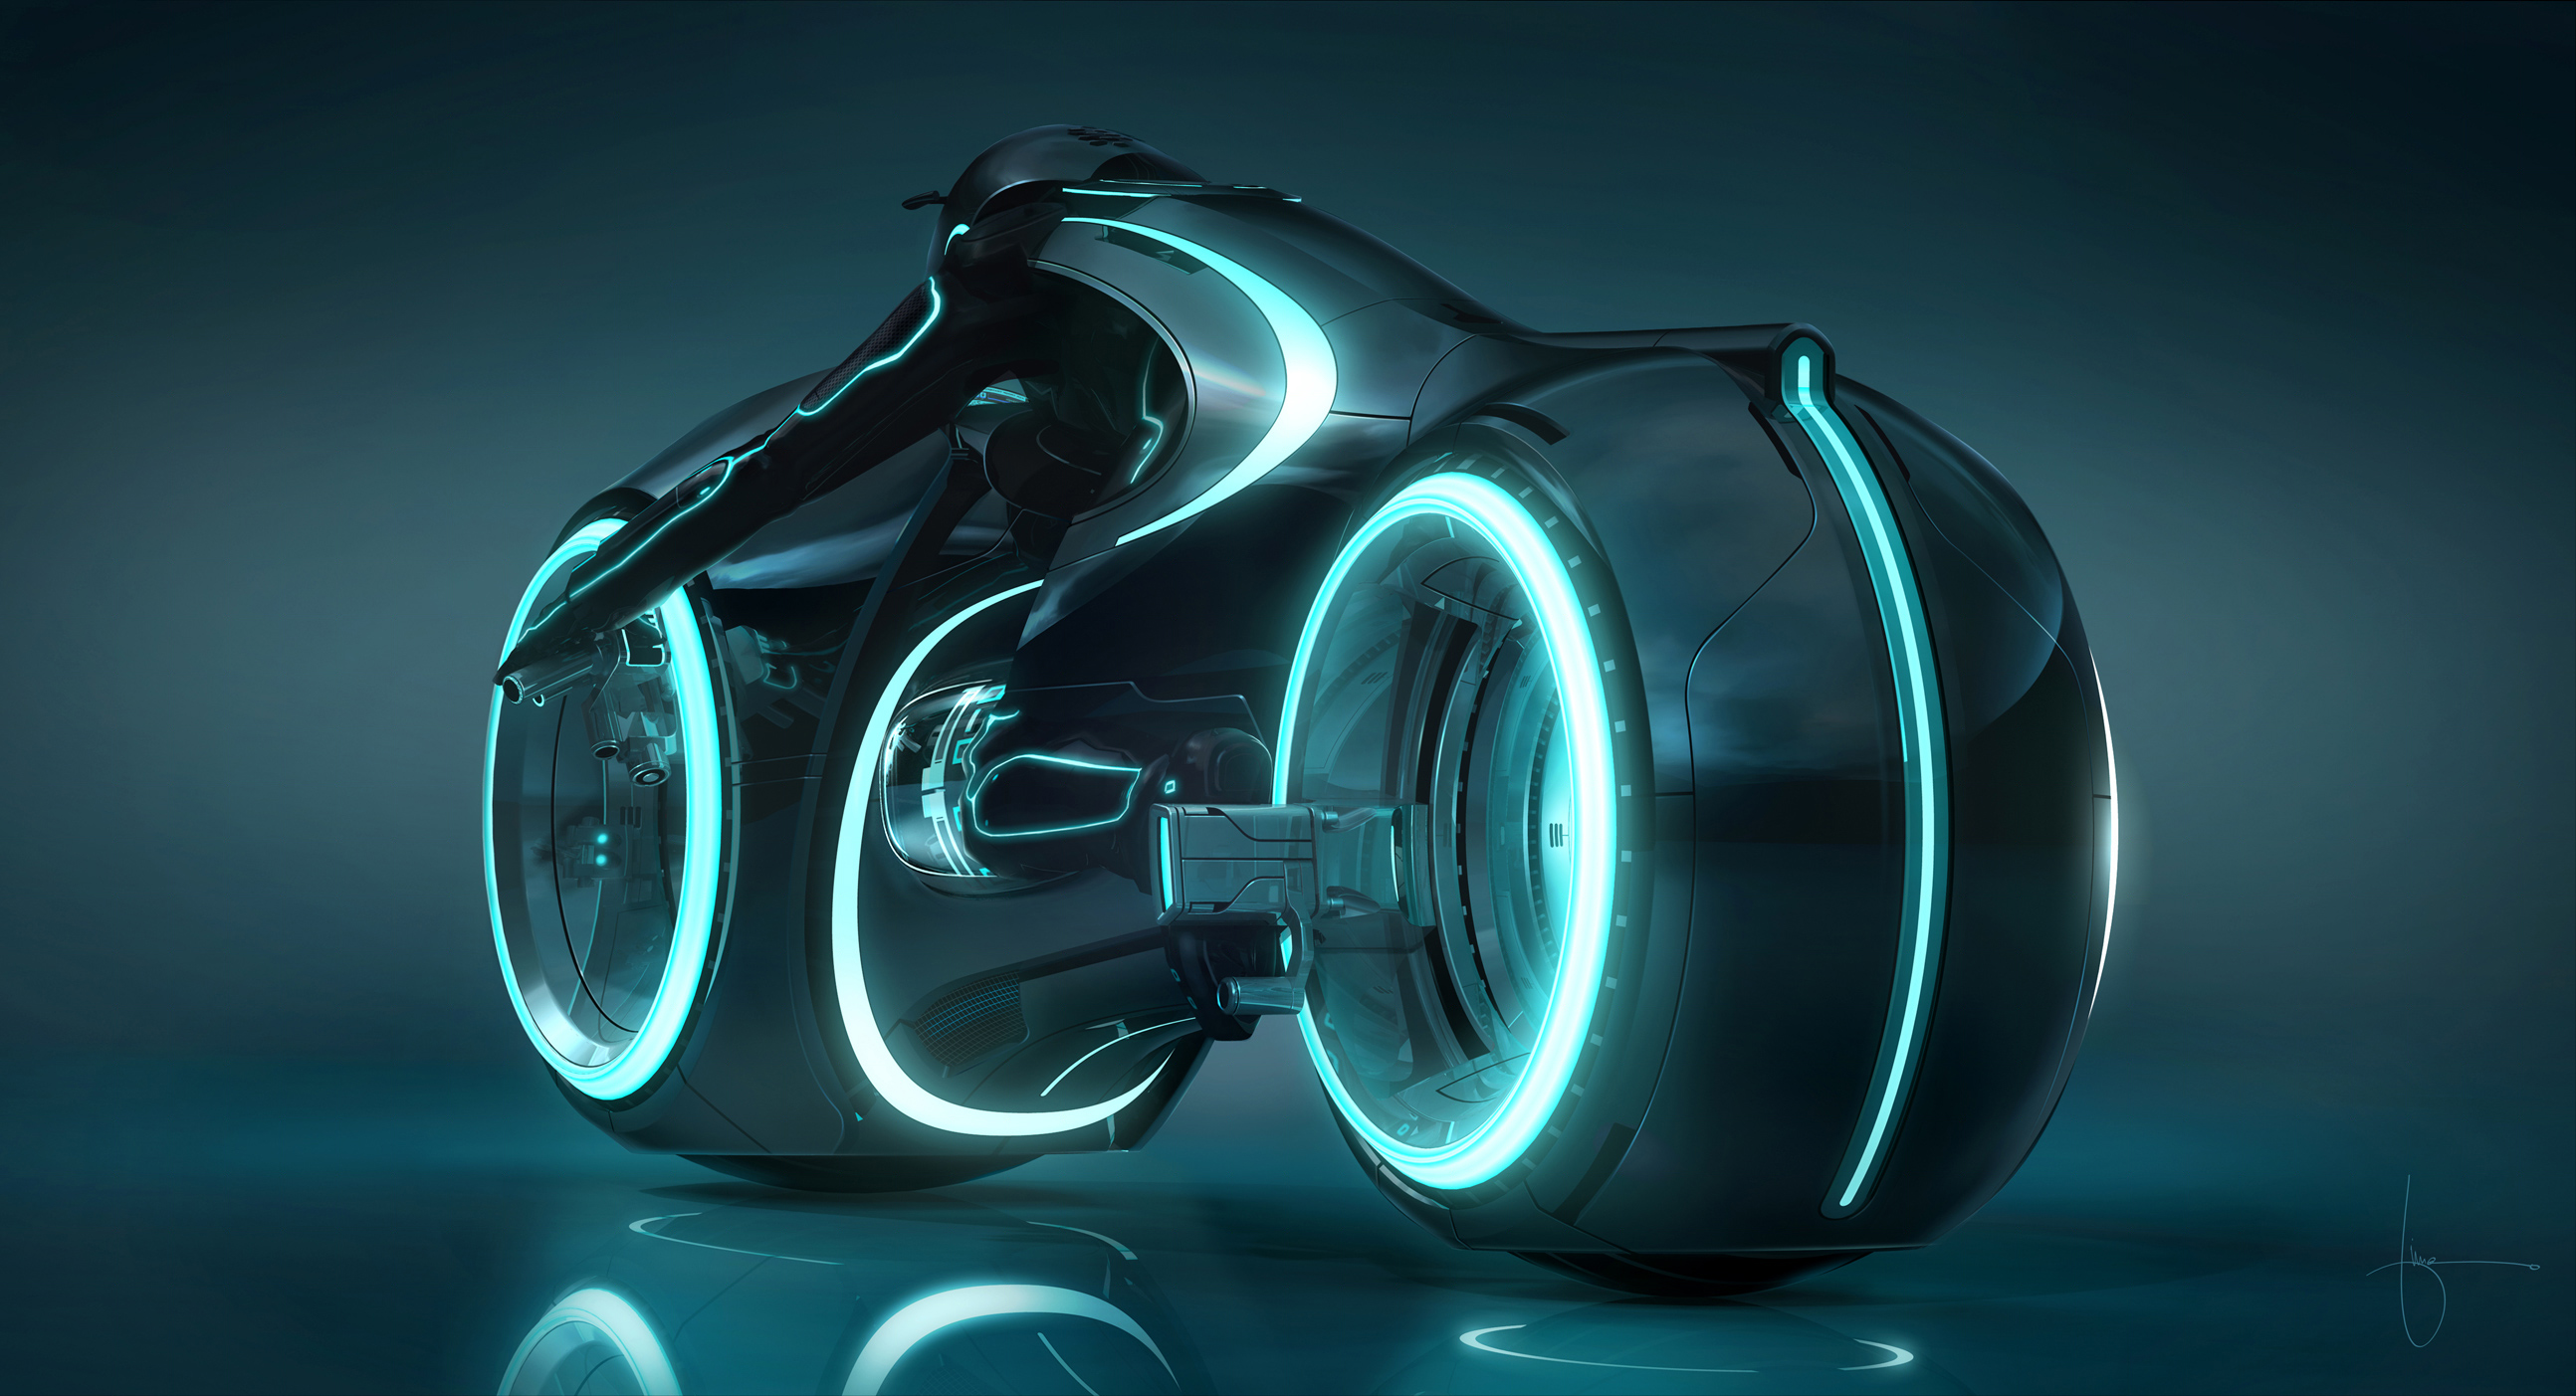 Tron Legacy is due to come out